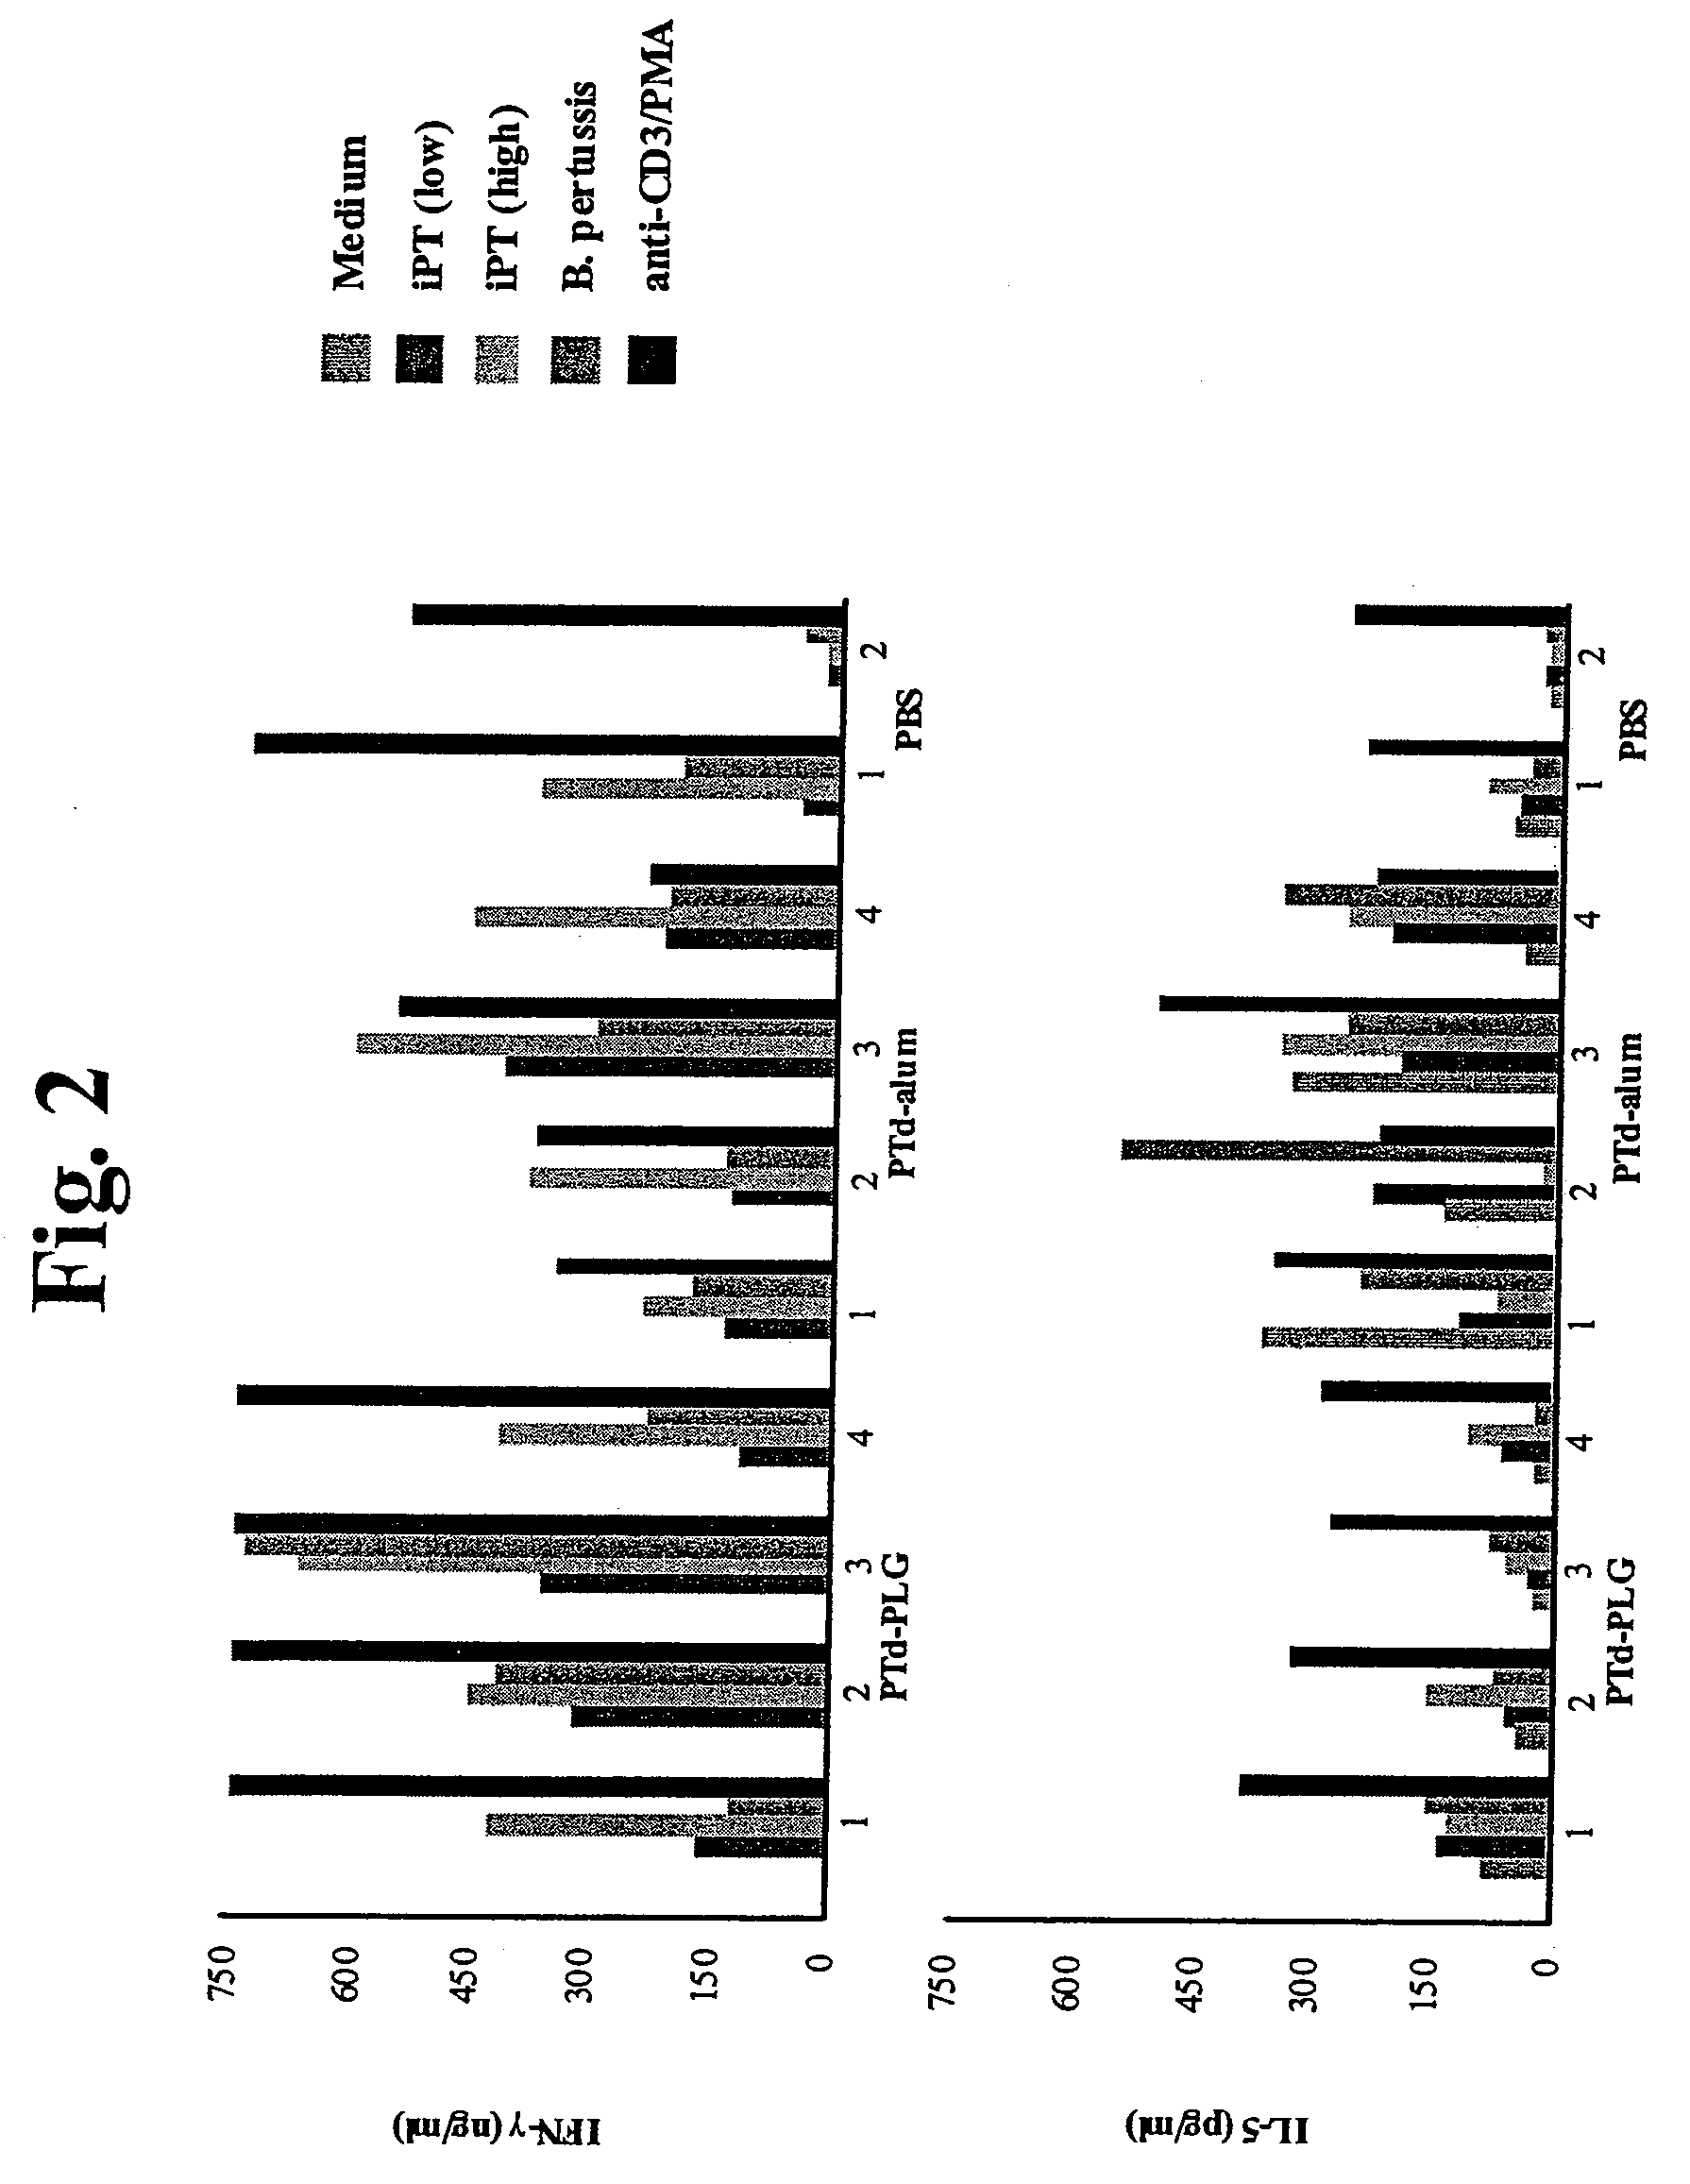 Method for Inducing a Cell-Mediated Immune Response and Improved Parenteral Vaccine Formulations Thereof